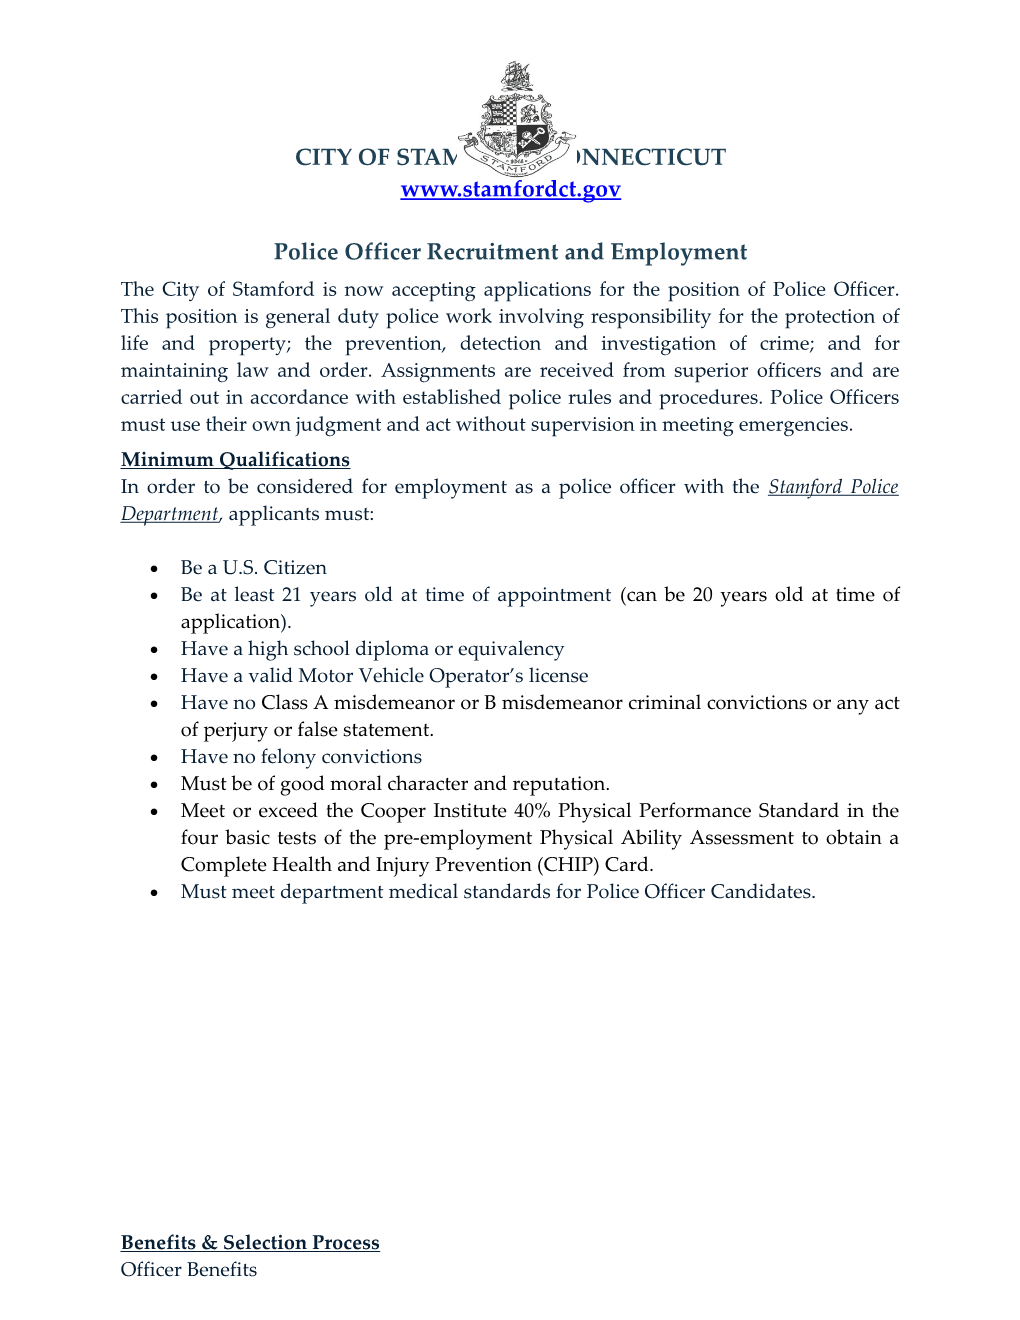 Police Officer Recruitment and Employment